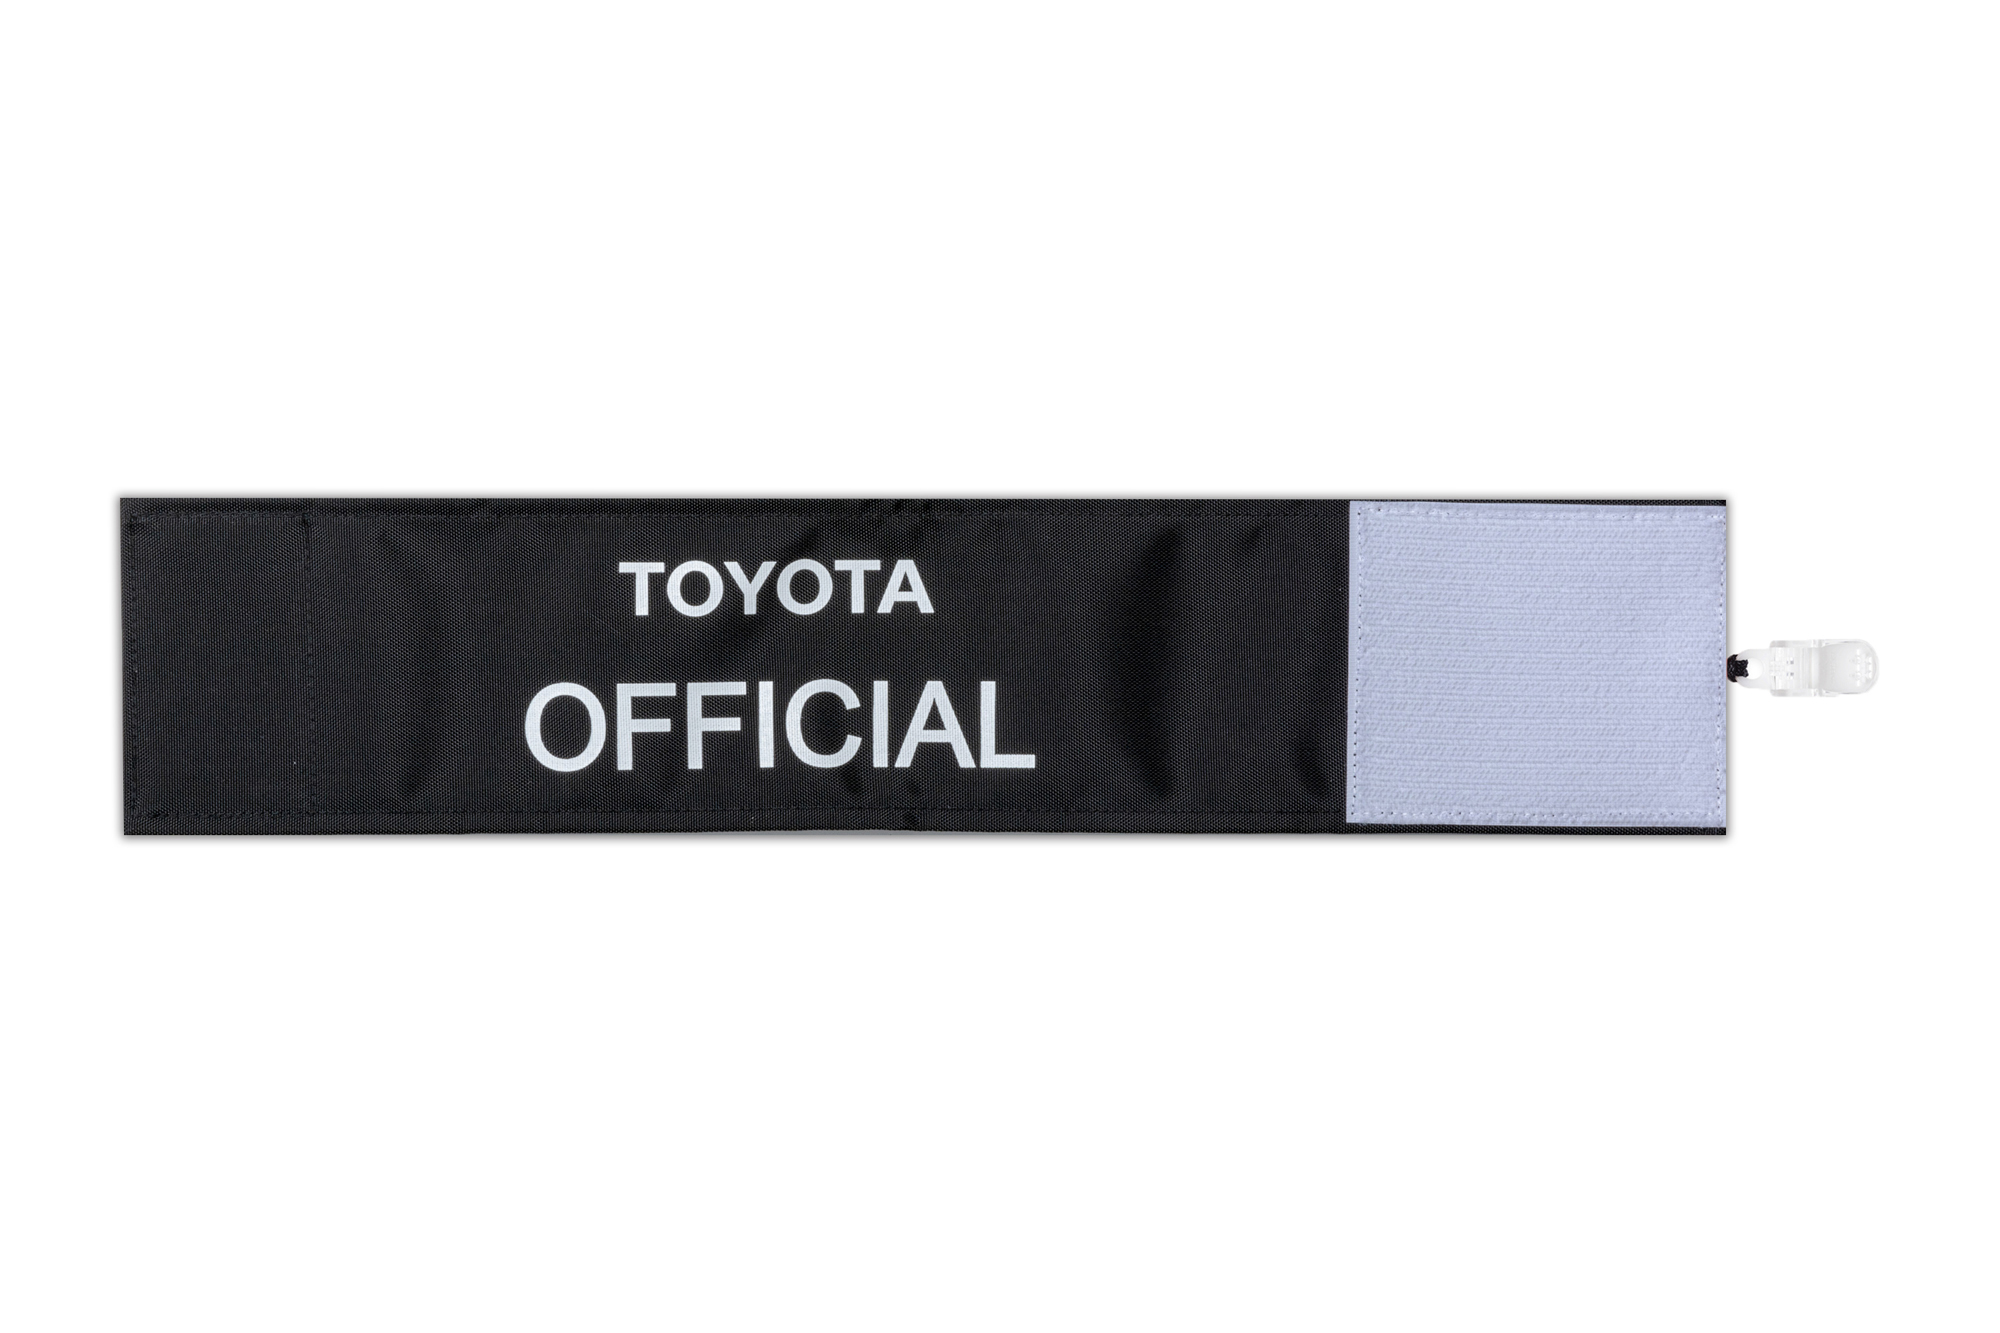 TOYOTA OFFICIAL